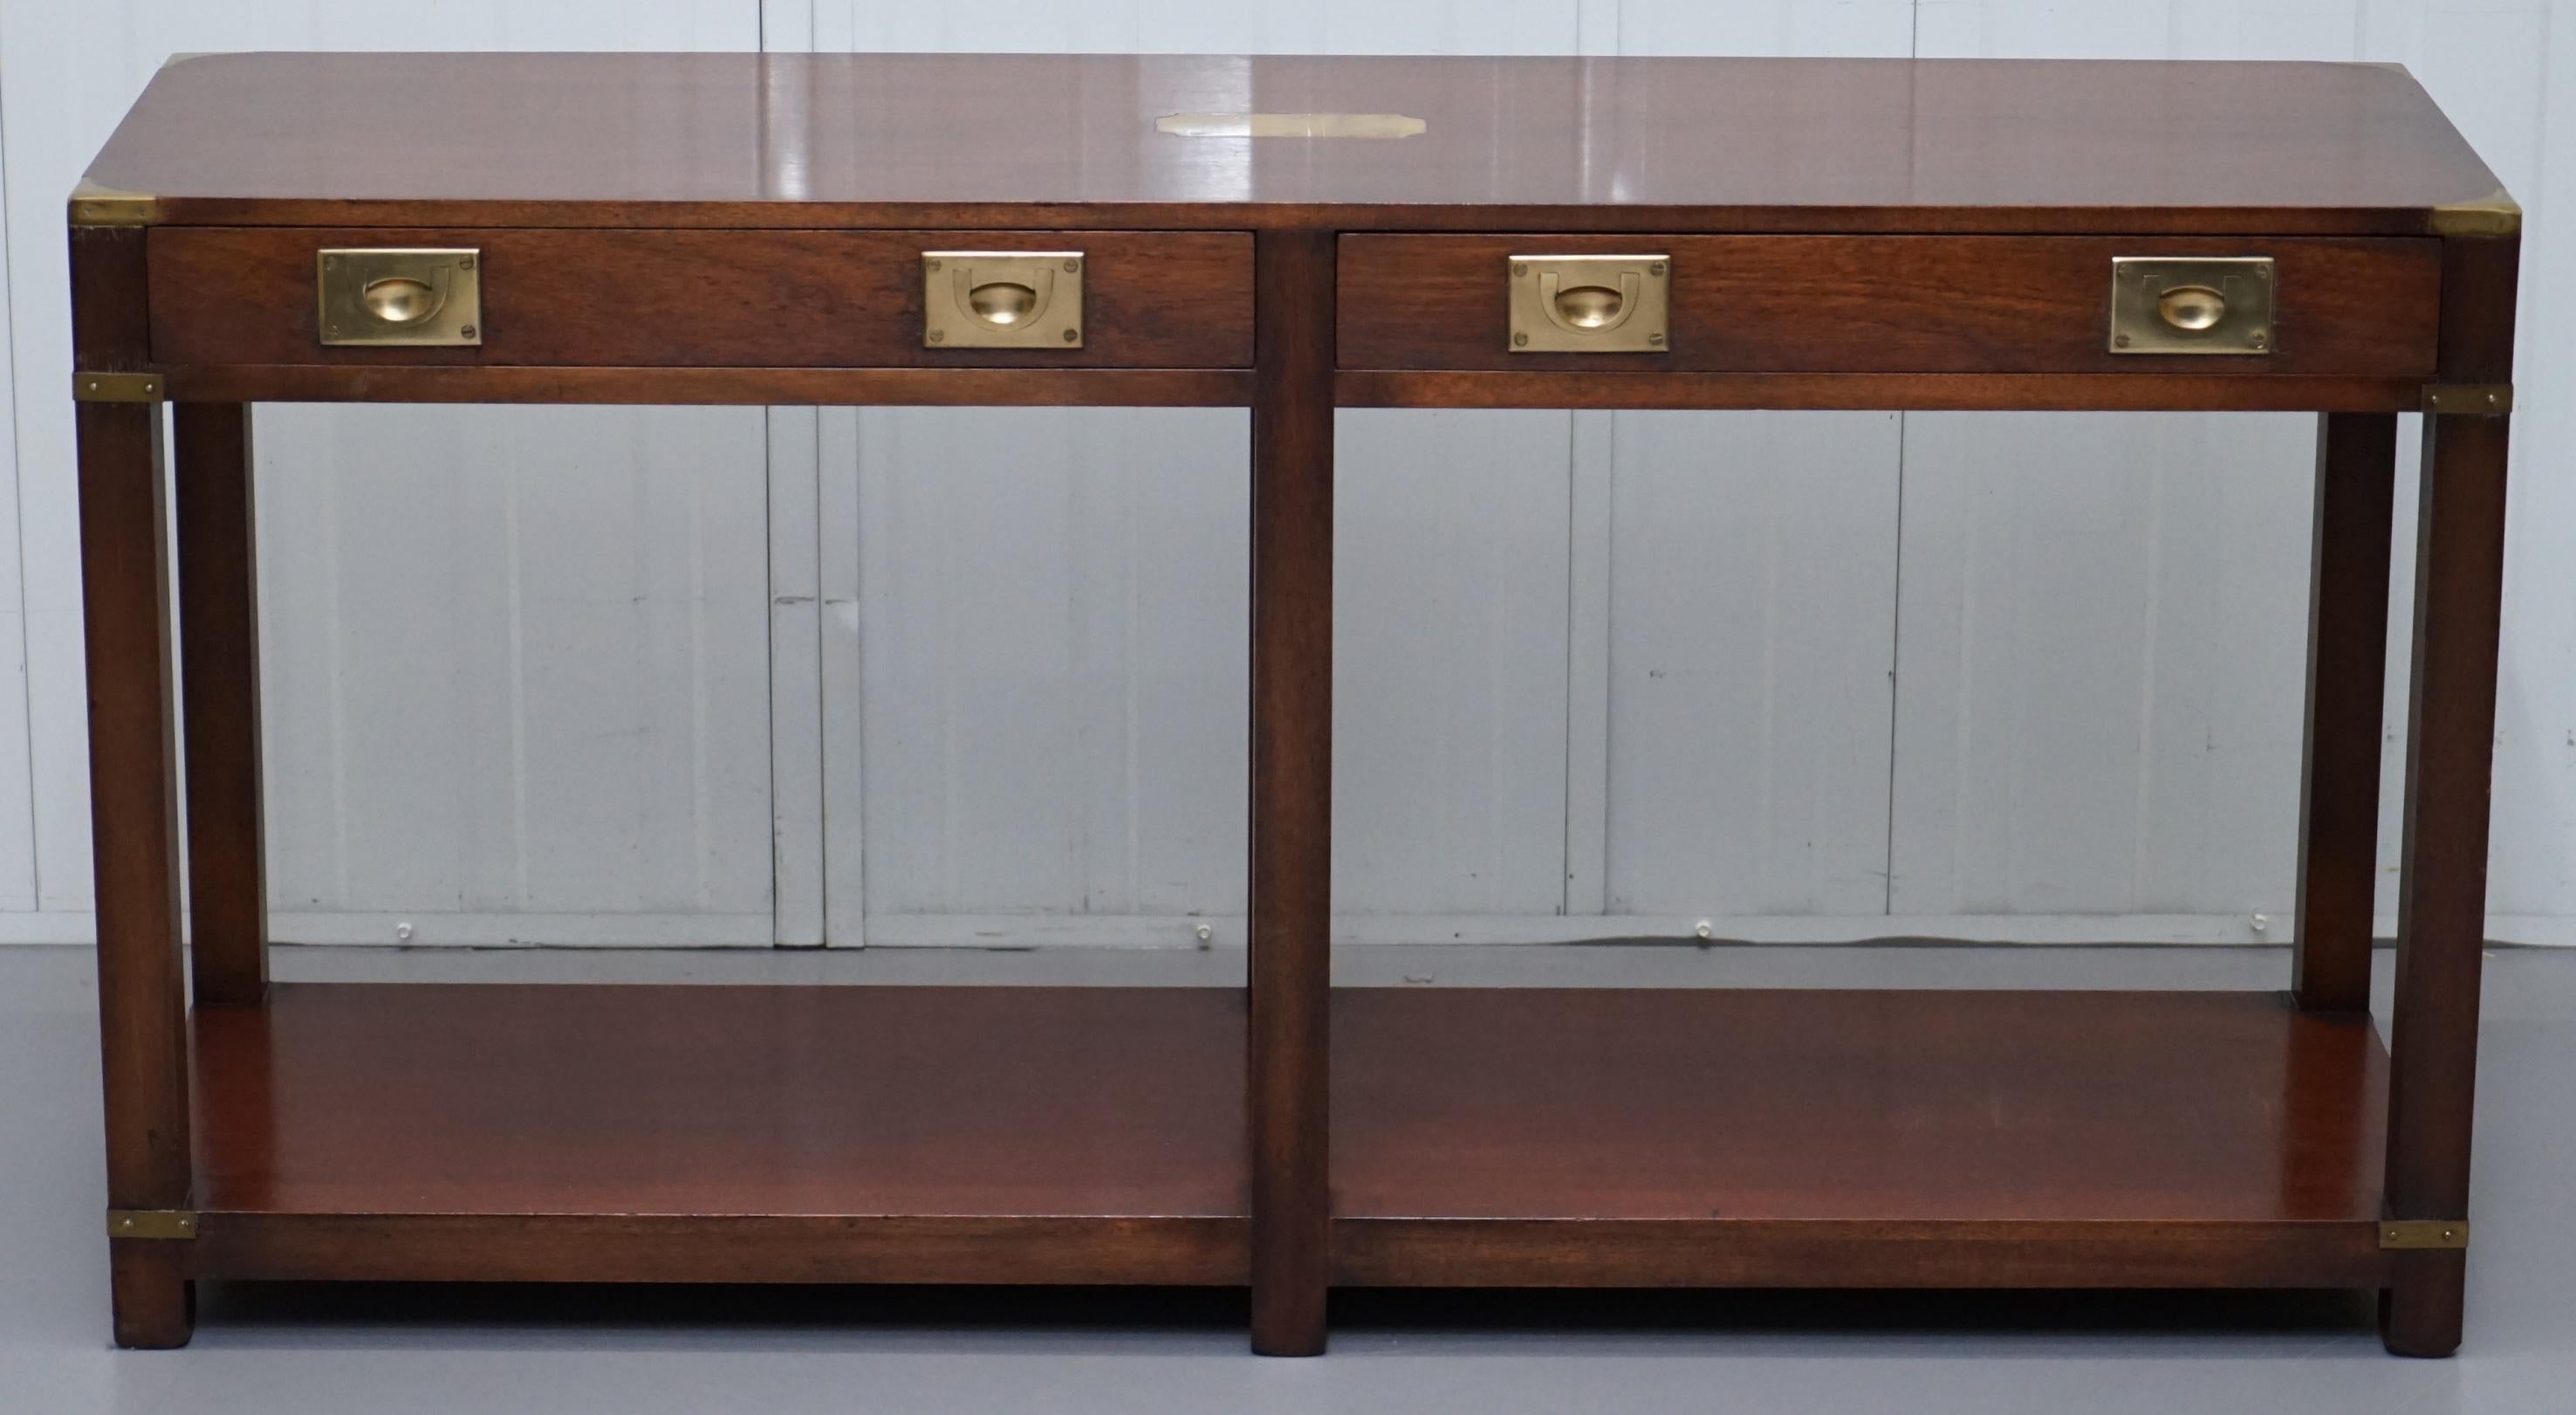 We are delighted to this lovely vintage Bevan Funnell Military Campaign style solid mahogany console table sideboard with drawers

These are part of a suite, I have the matching pair of side table sized chests of drawers listed under my other